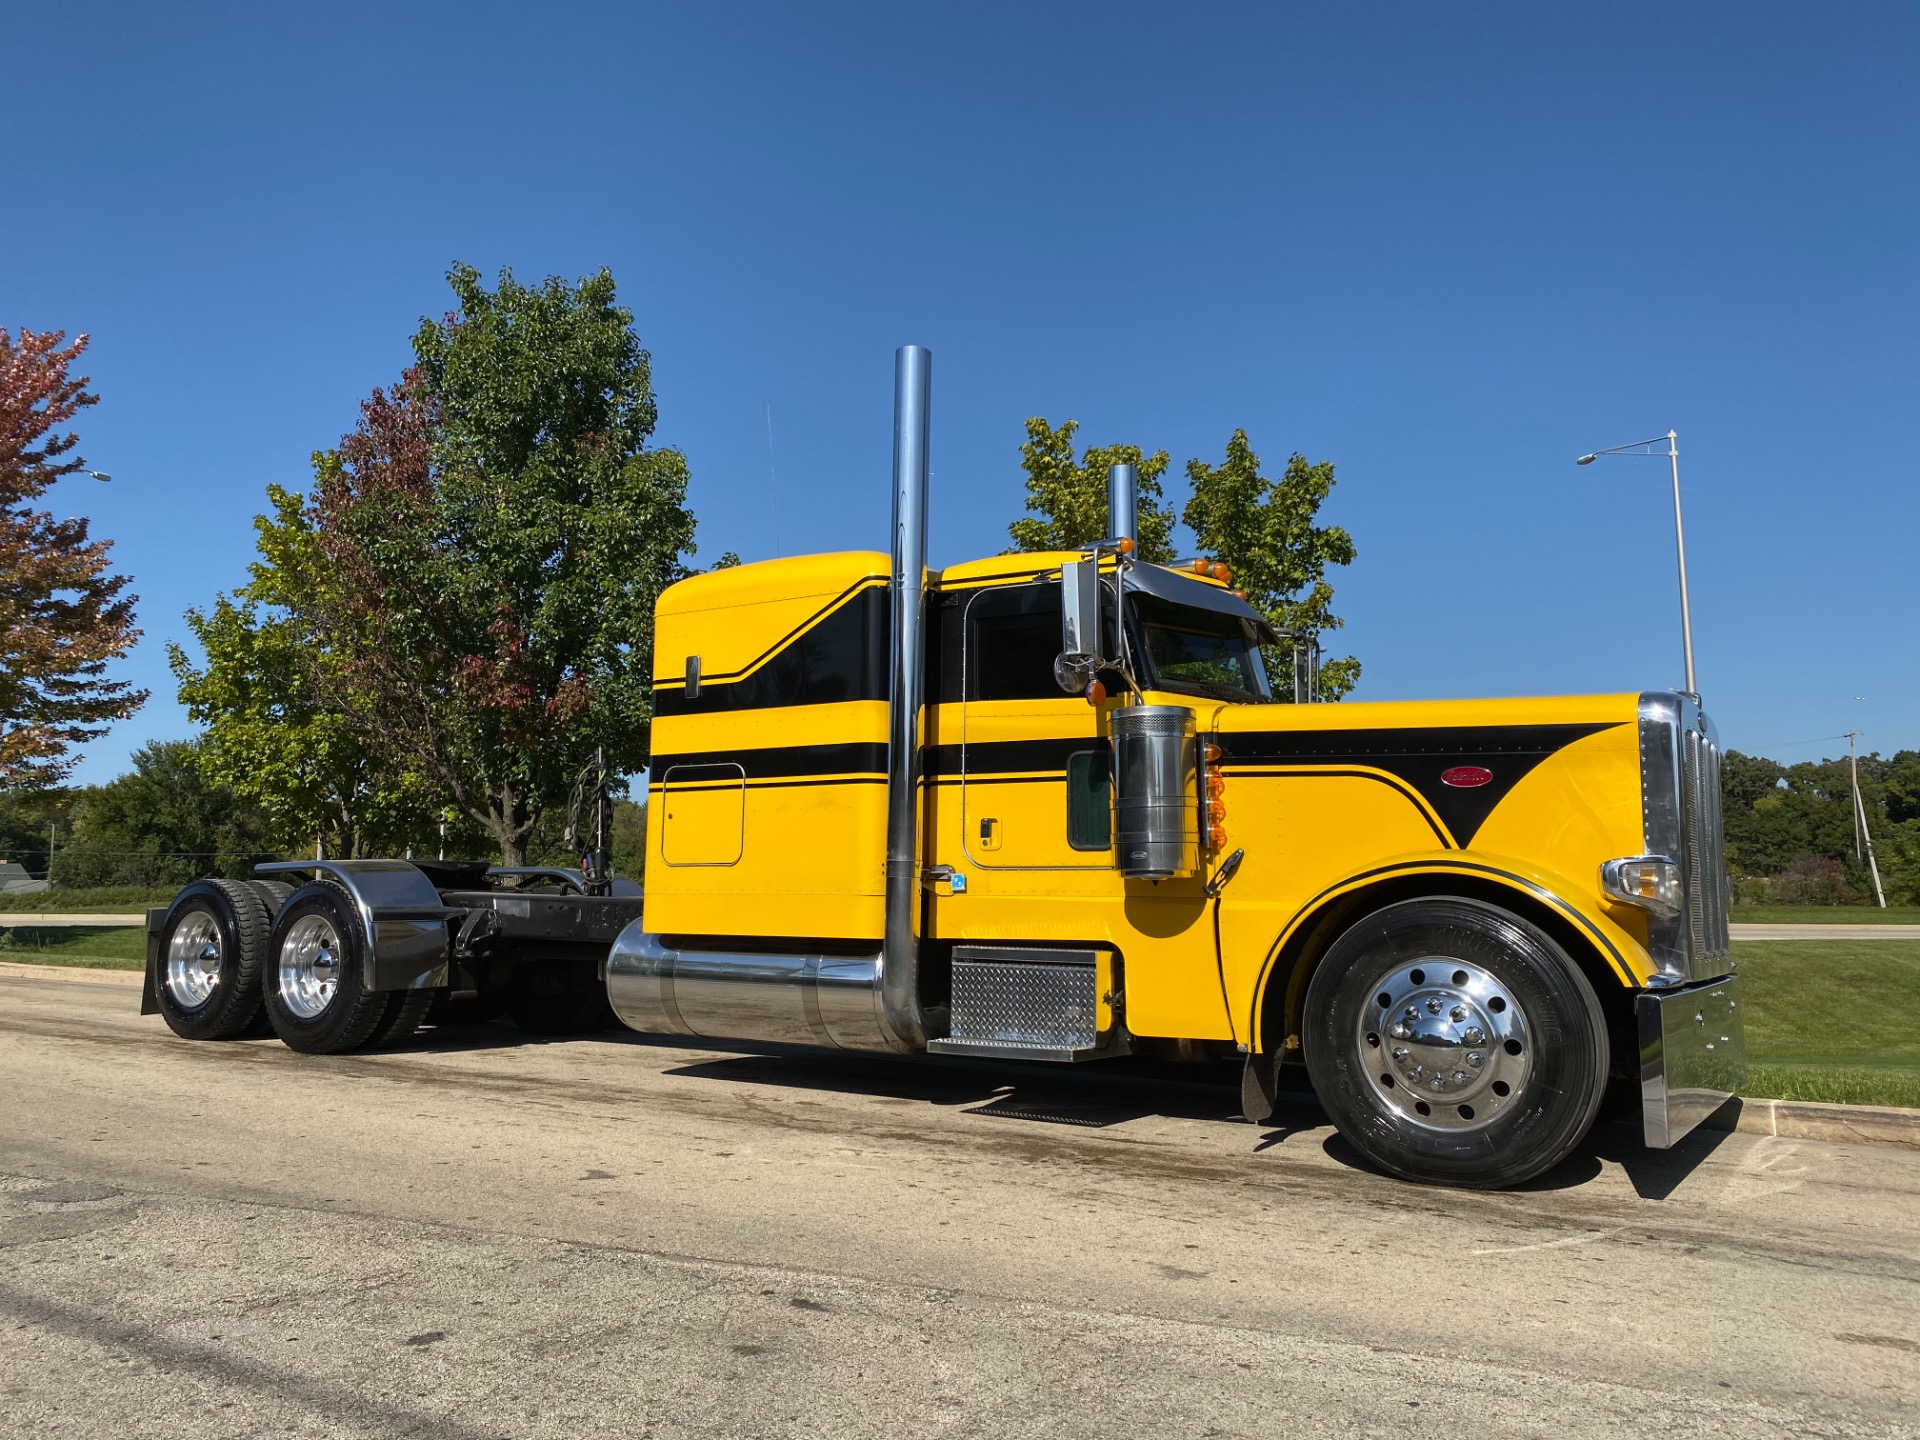 Used 2013 Peterbilt 389 Glider Kit For Sale (Sold) | Midwest Truck ...